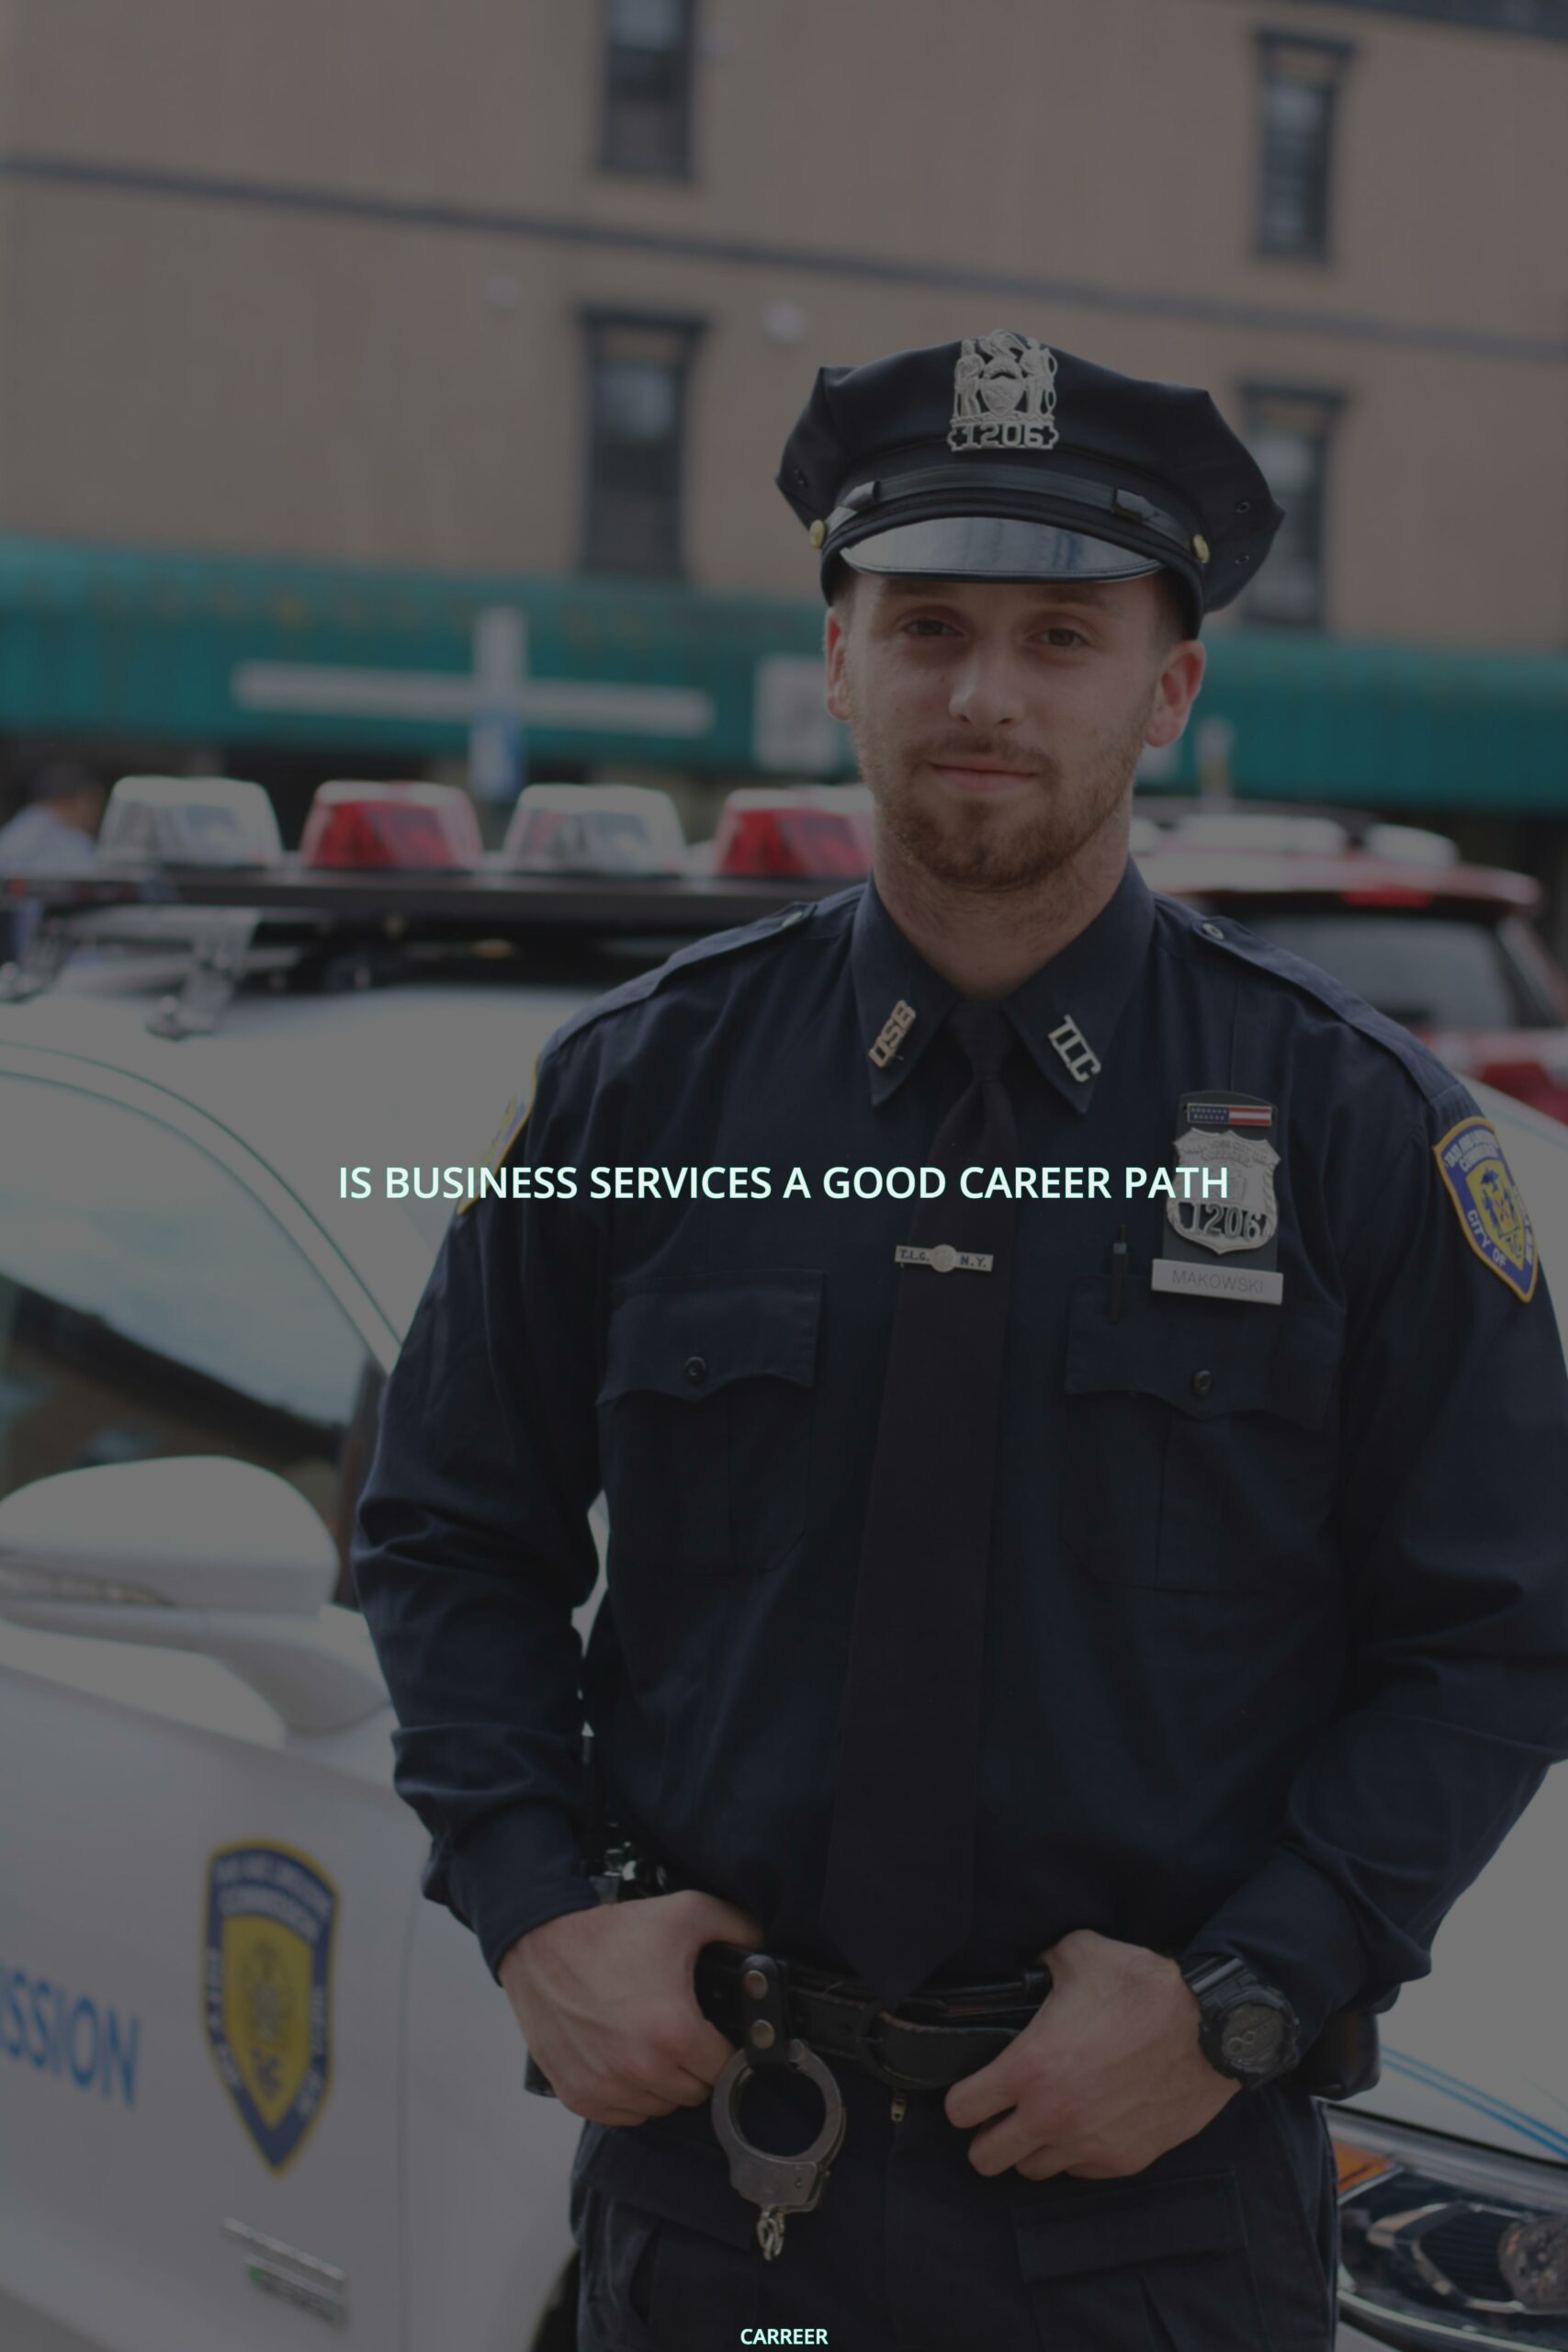 Is business services a good career path